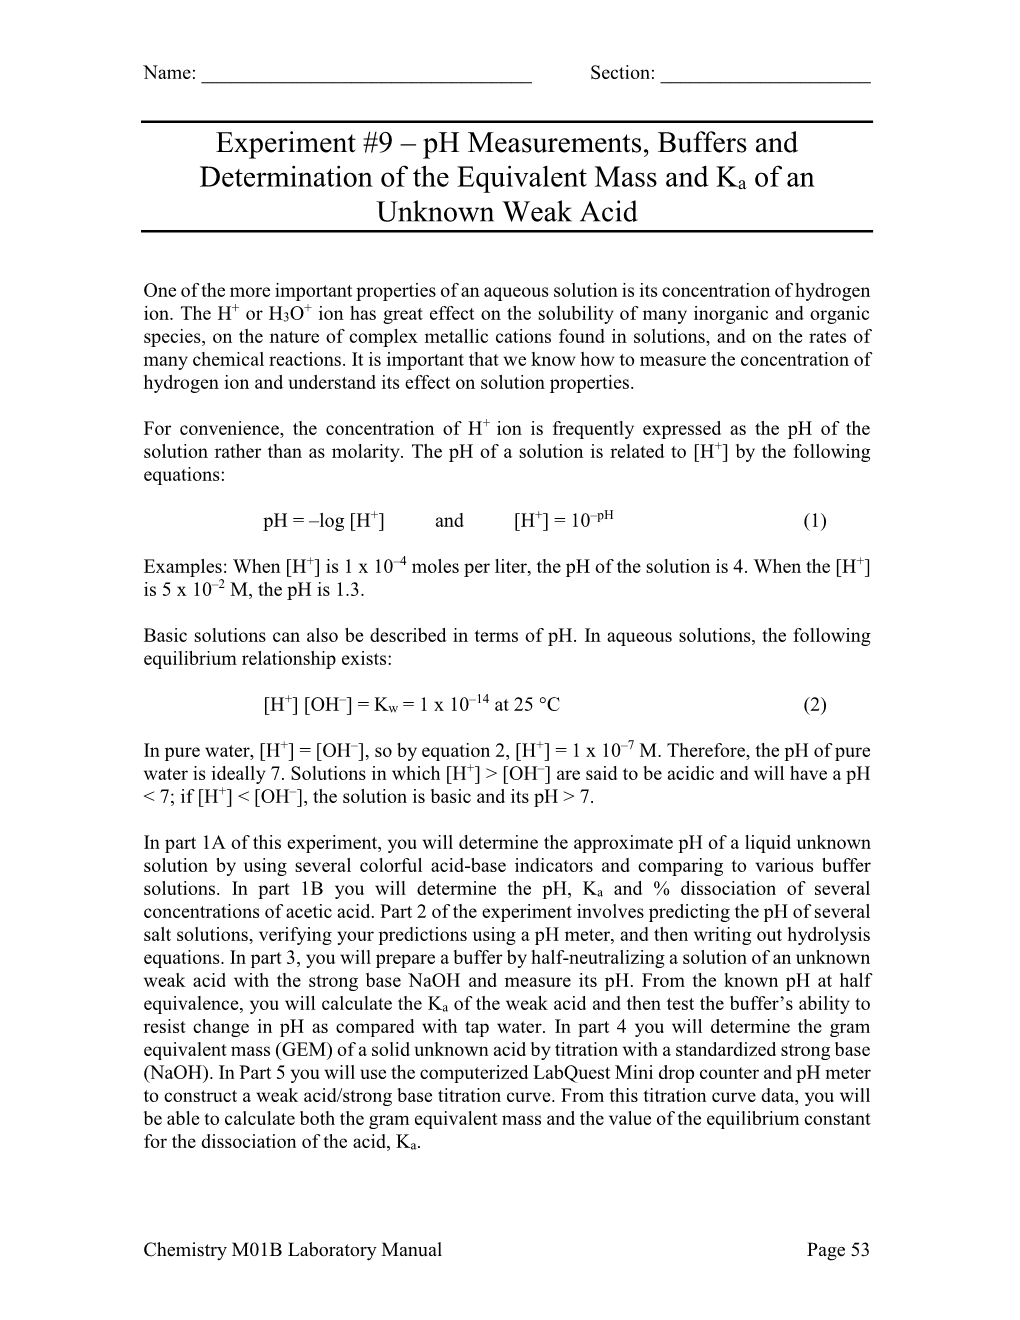 Ph Measurements, Buffers and Determination of the Equivalent Mass and Ka of an Unknown Weak Acid